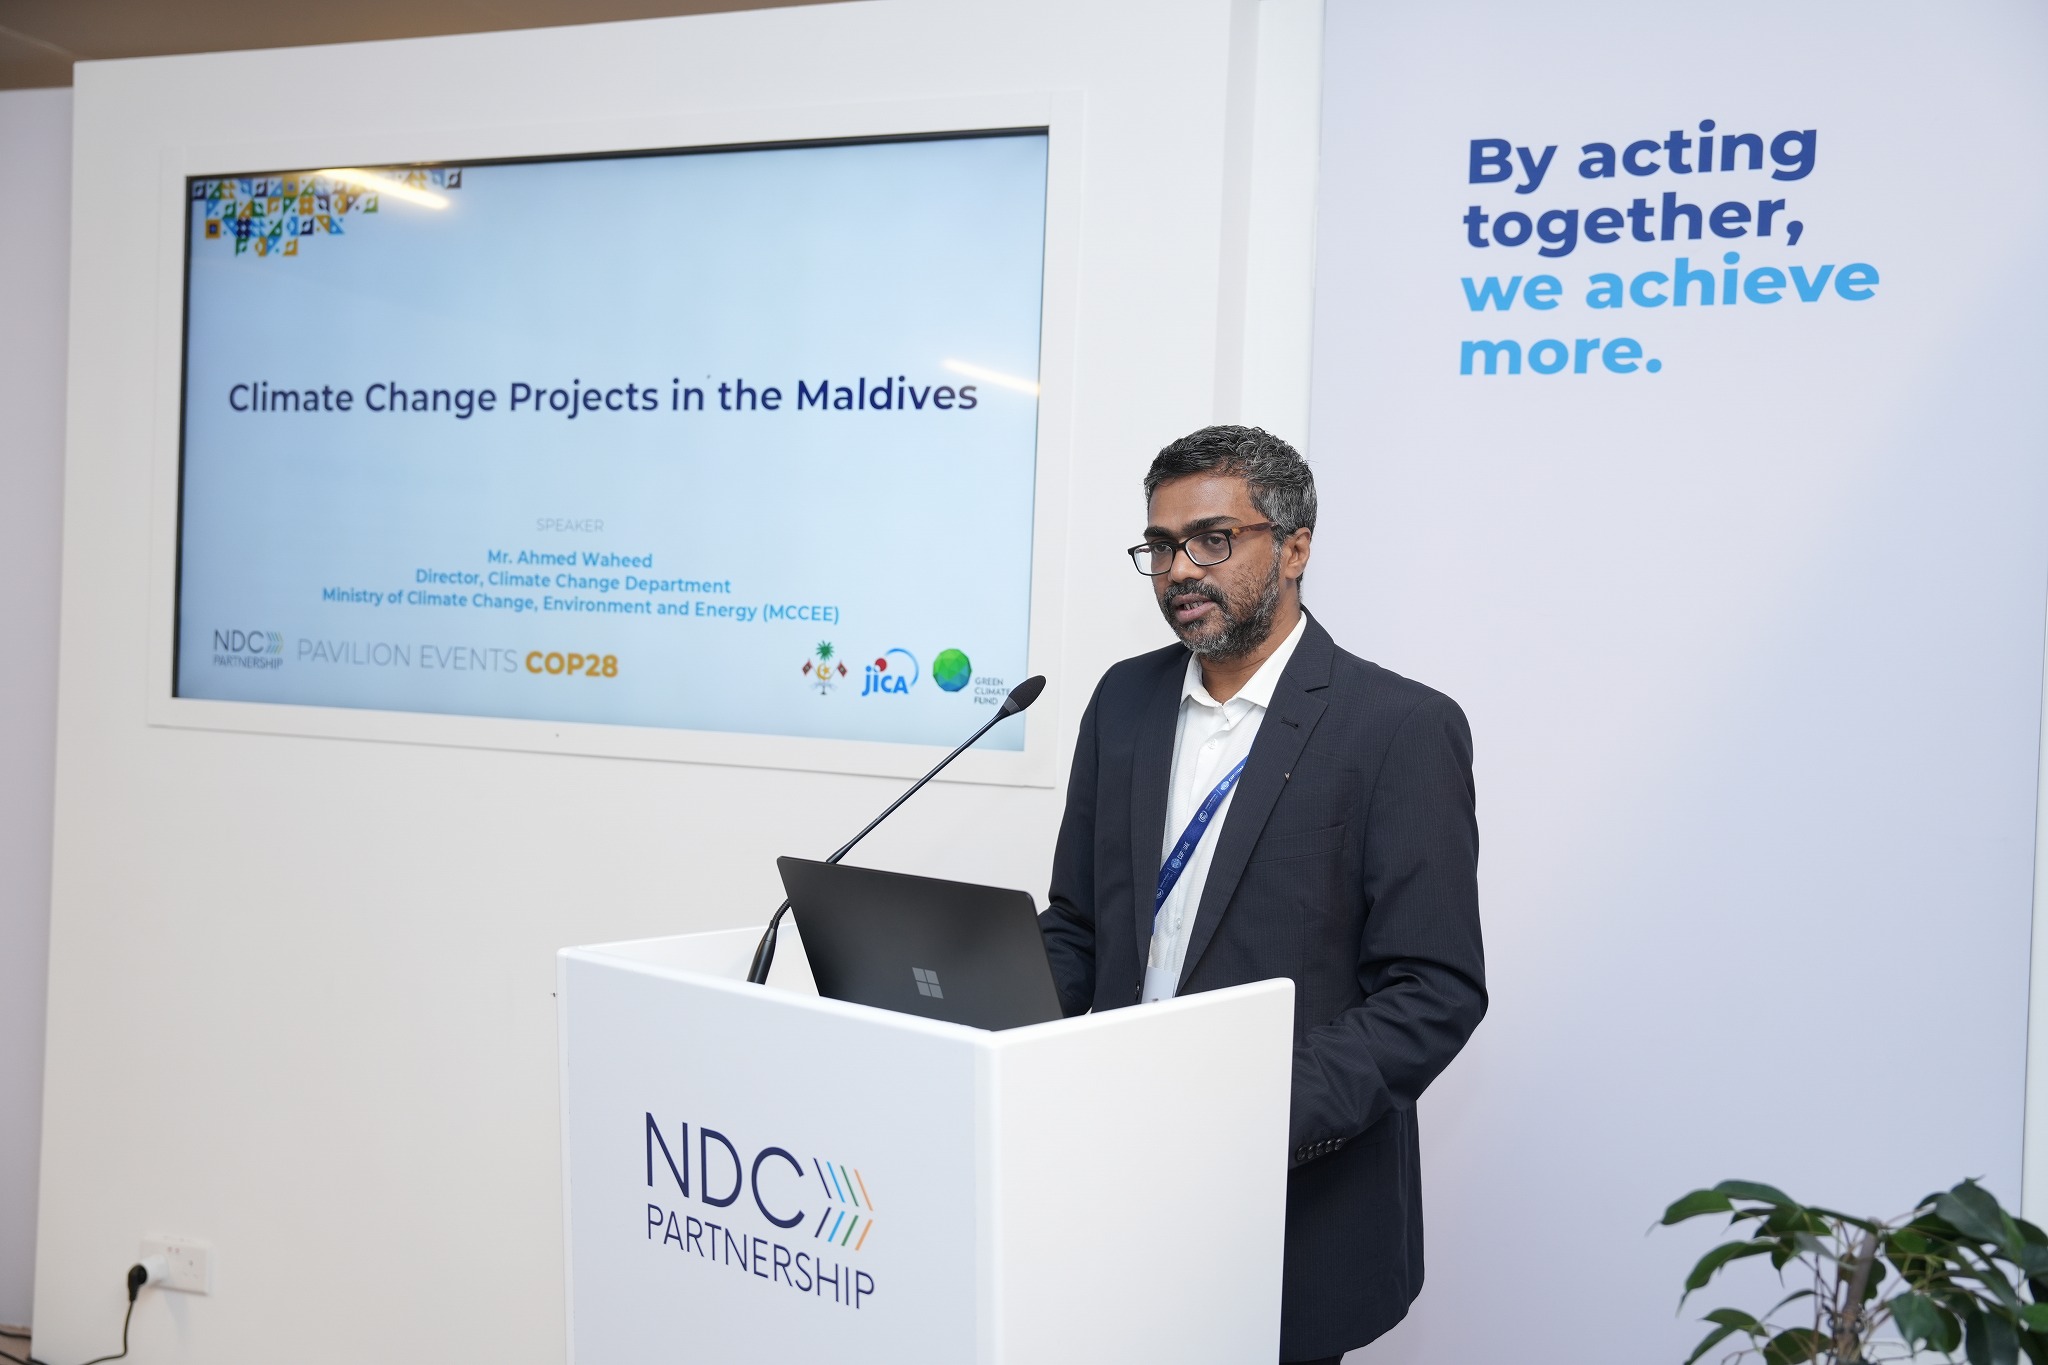 Climate Change Projects in the Maldives, Mr. Ahmed Waheed, Ministry of Climate Change, Environment and Energy (MCCEE)